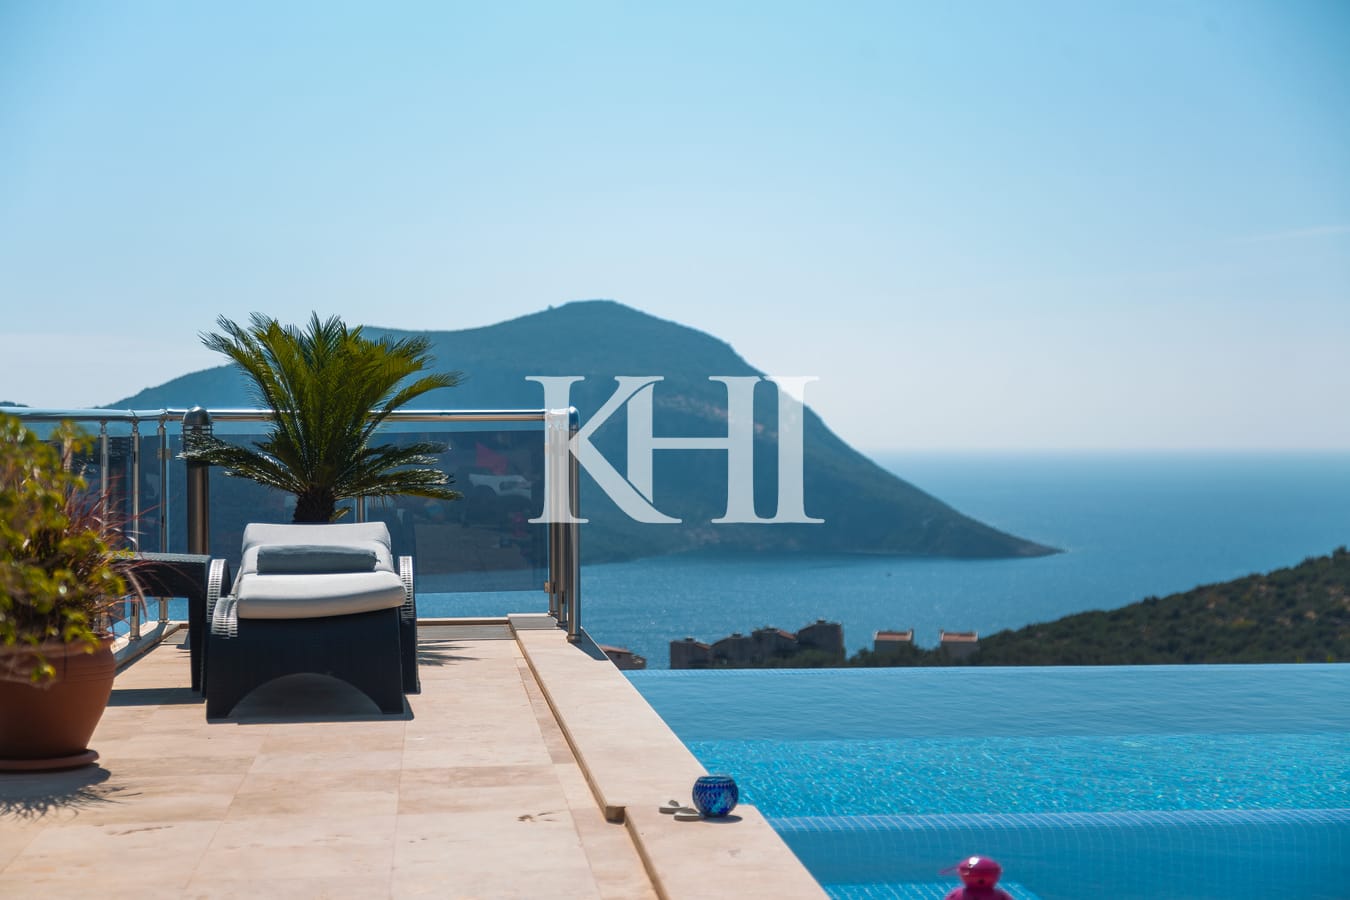 Detached Villa For Sale With Panoramic Kalkan View Slide Image 8